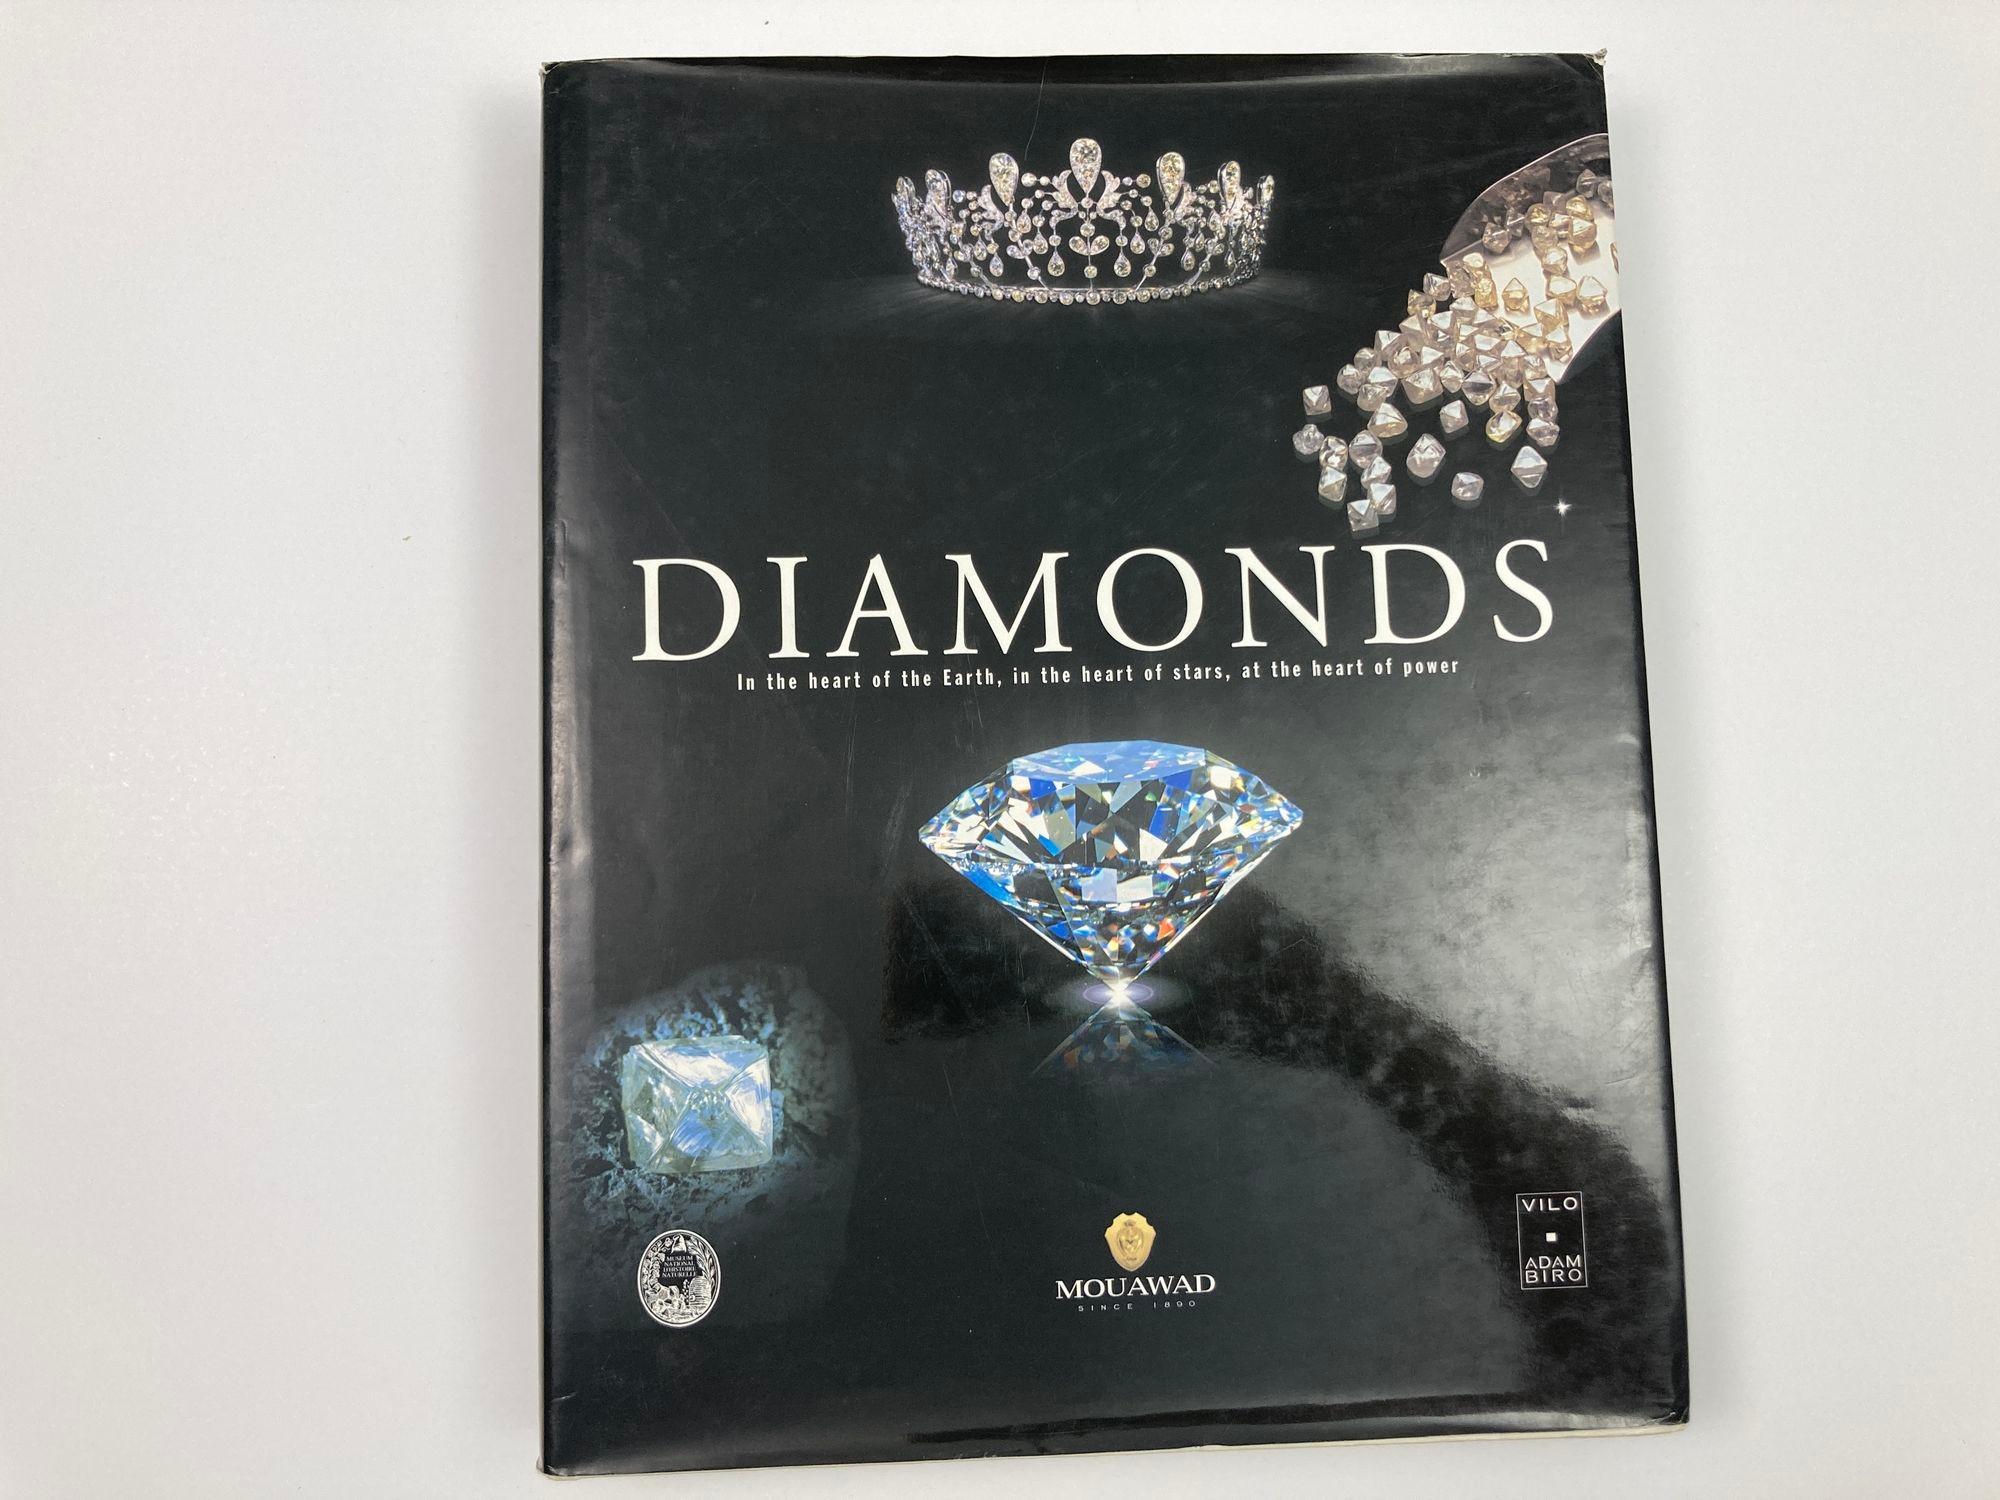 Diamonds: In the Heart of the Earth, in the Heart of Stars, at the Heart of Power Hardcover Book.Mouawad first edition december 1, 2001 by Hubert Bari (Author), Violaine Sautter (Author).Patrick Absalon, Hubert Bari, Michele Bimbenet-Privat, Robyn